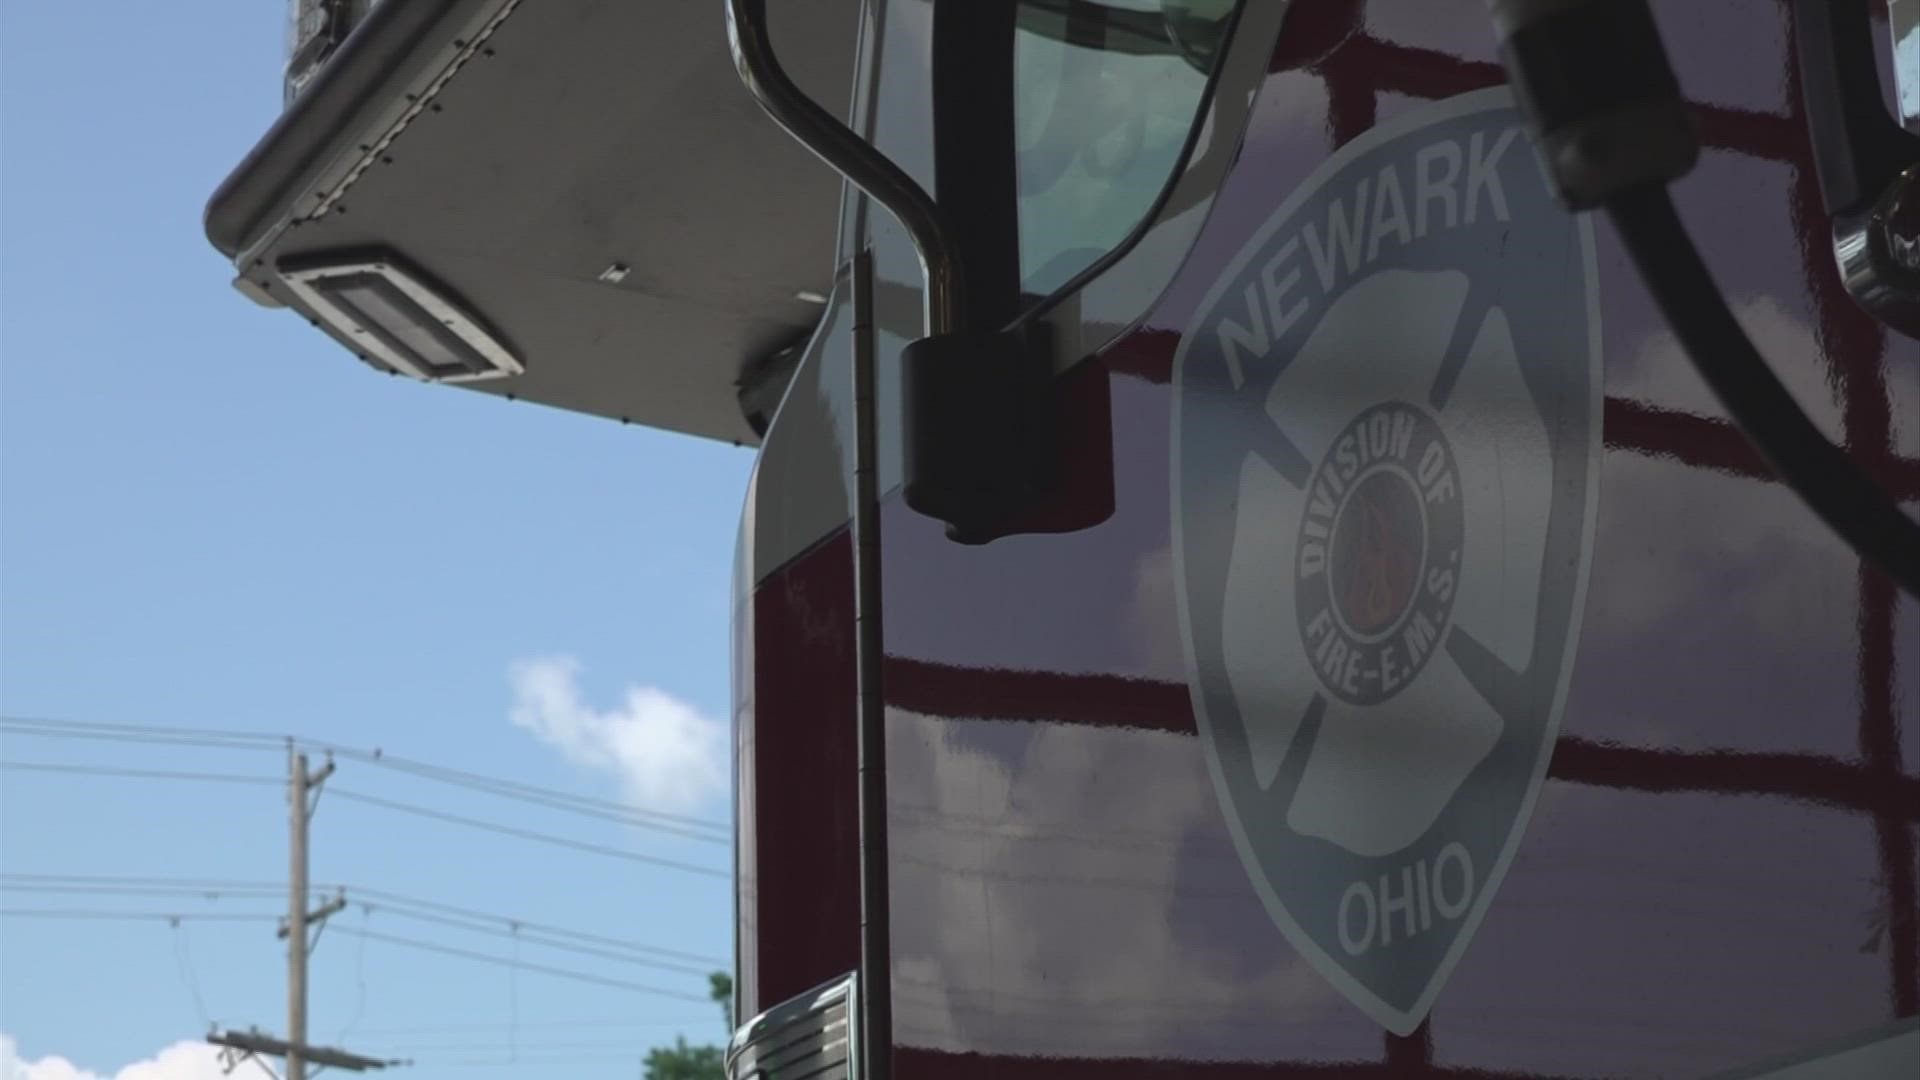 The fire department says it’s battling short-staffing, as well as an increase in the number of calls.